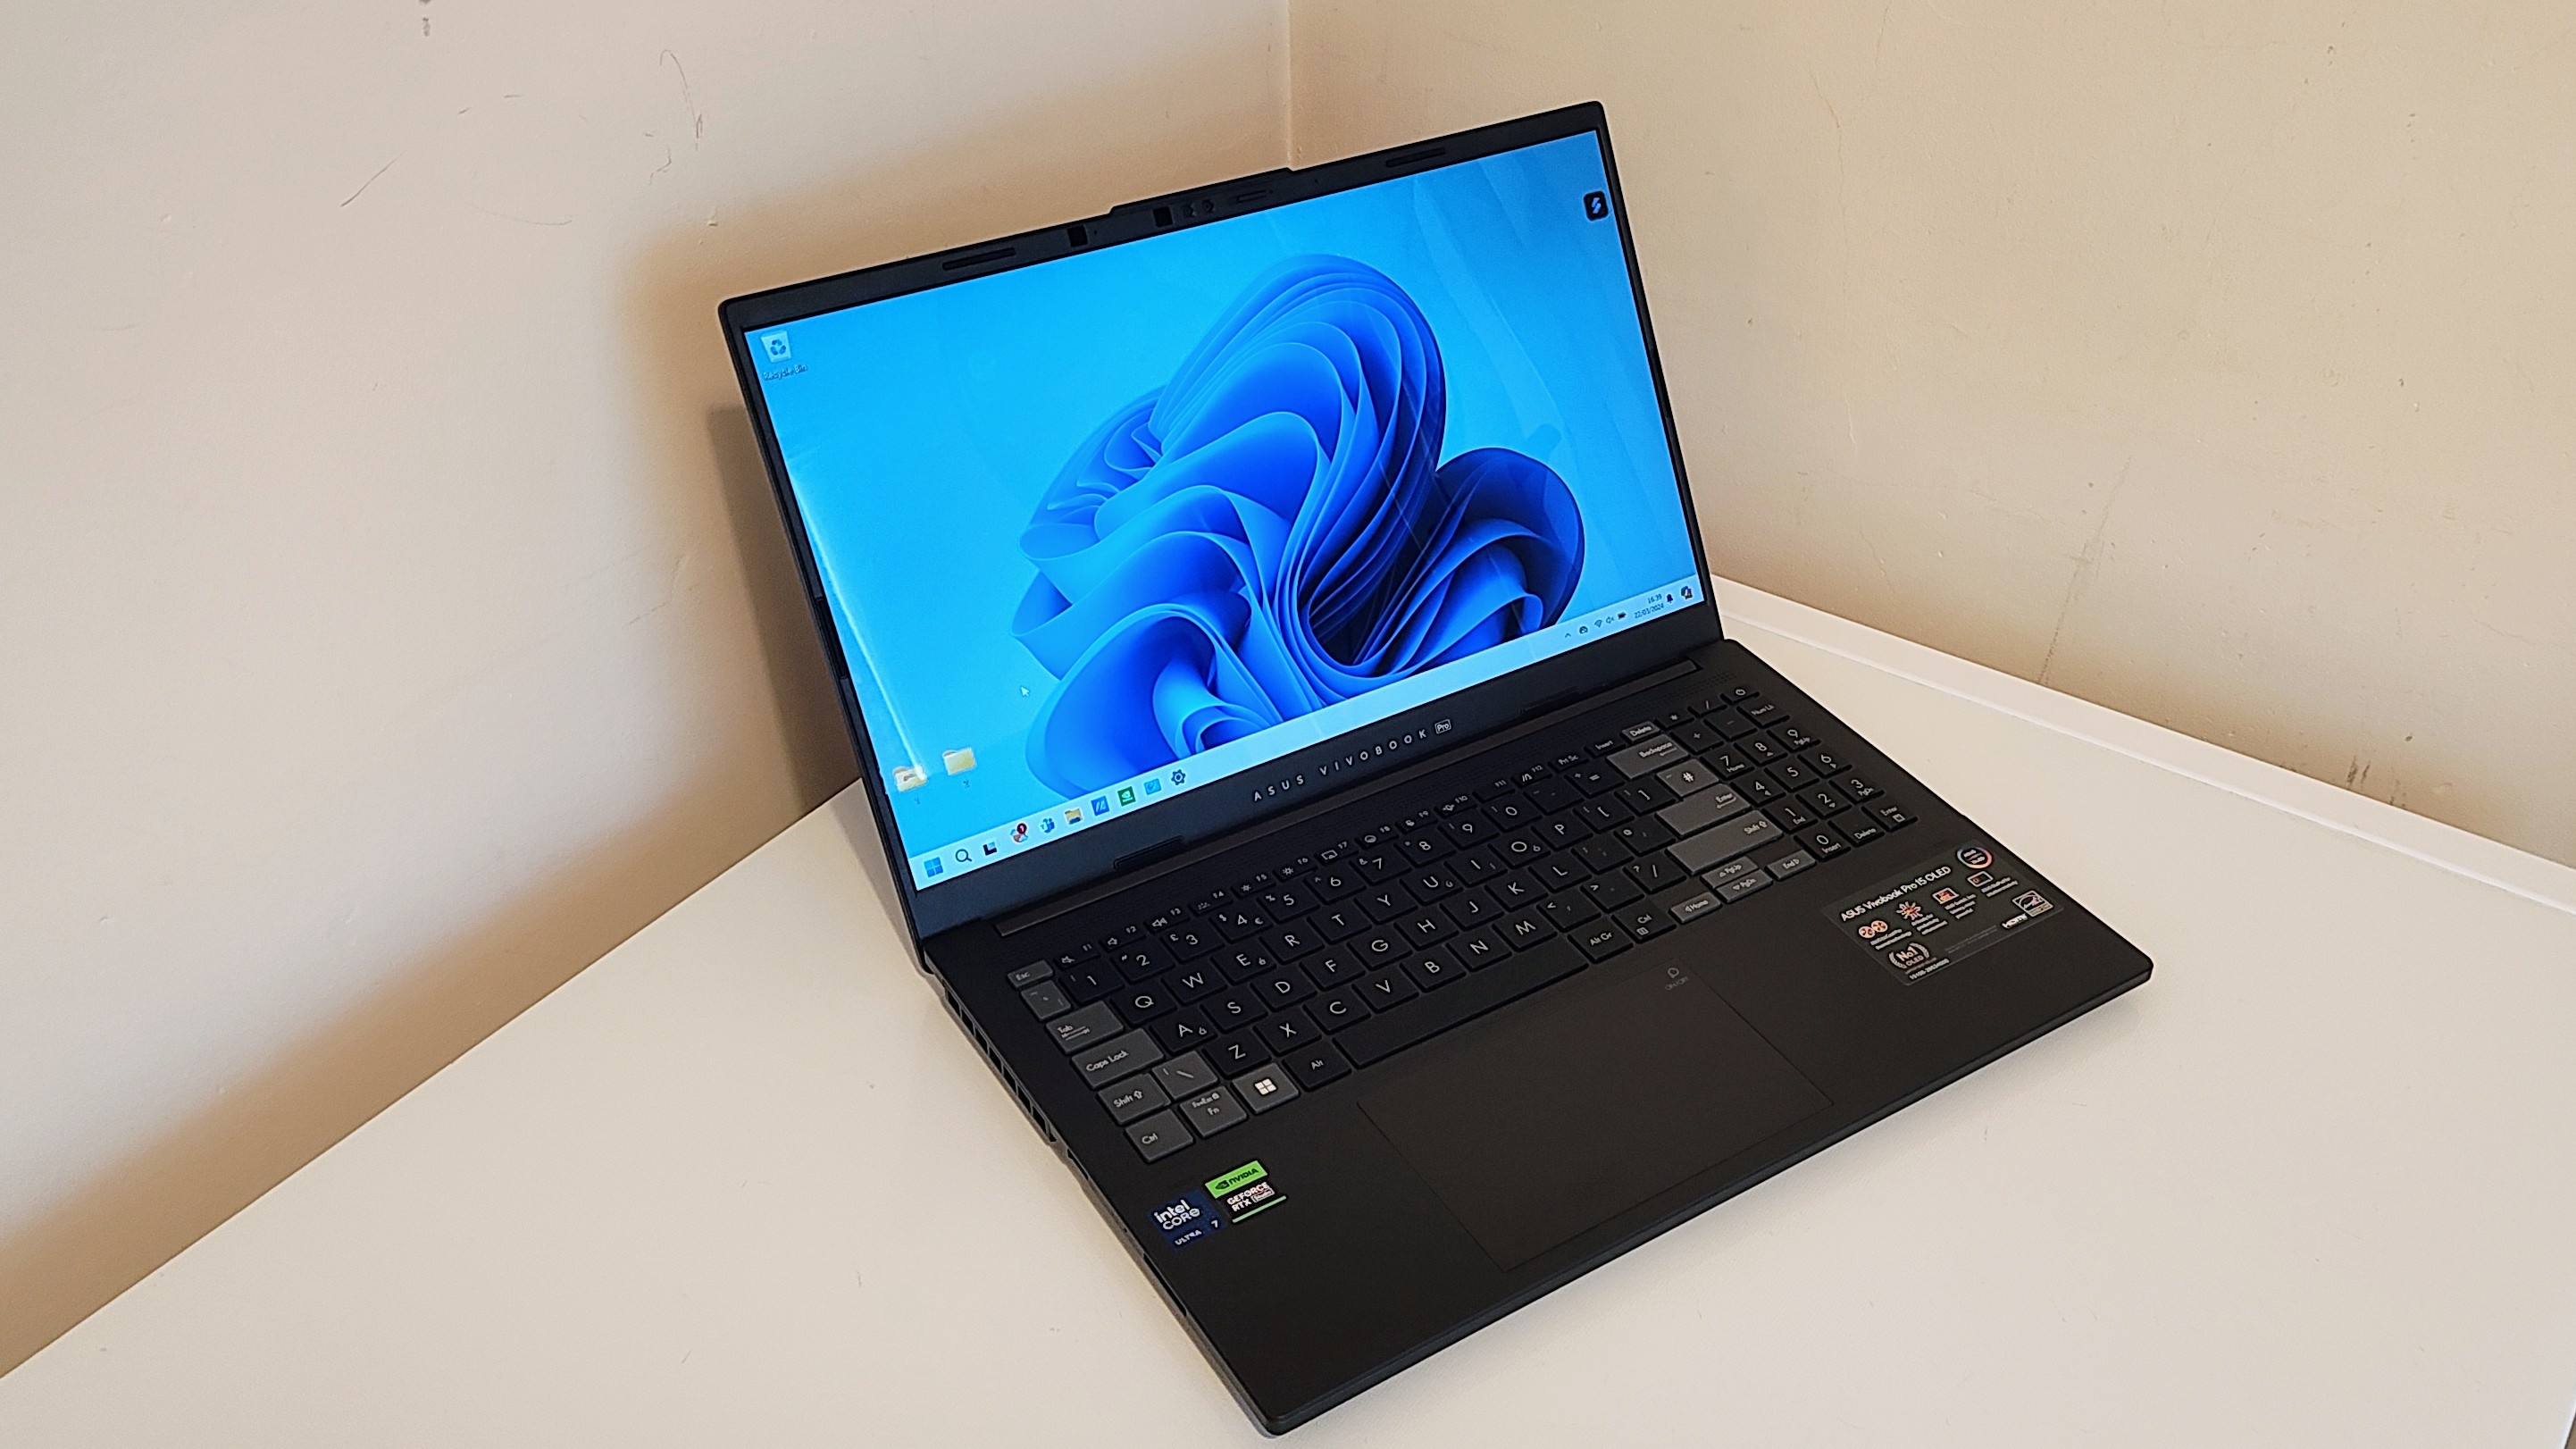 The Asus Vivobook Pro 15 in the context of ITPro